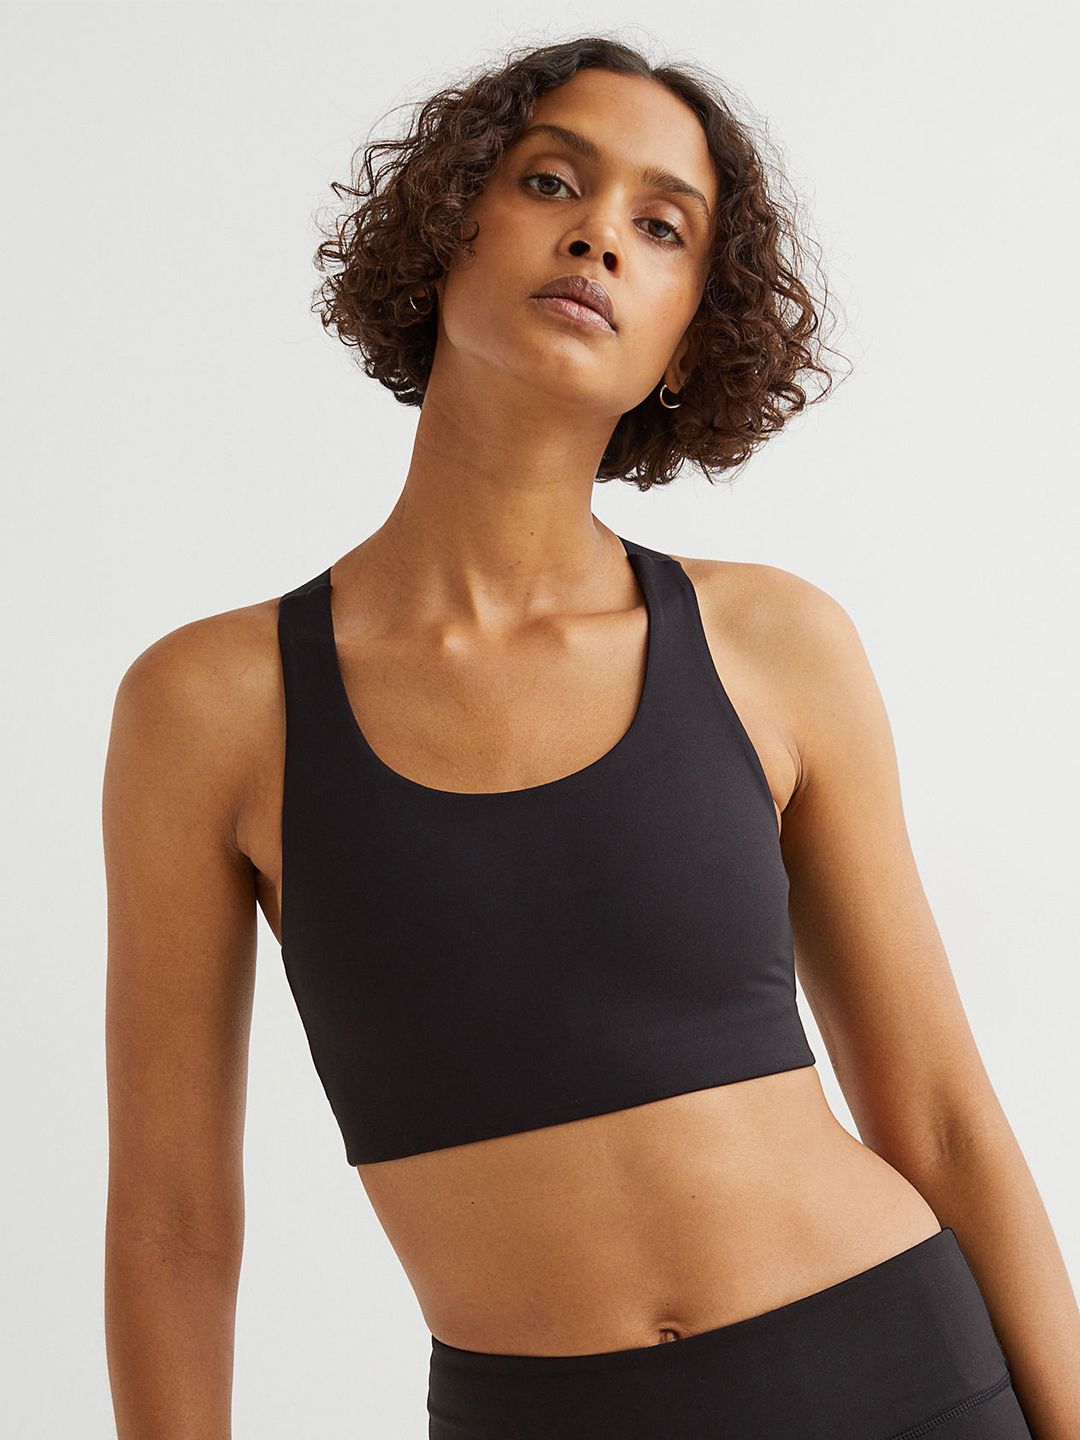 H&M Black Solid High Support Sports Bra Price in India